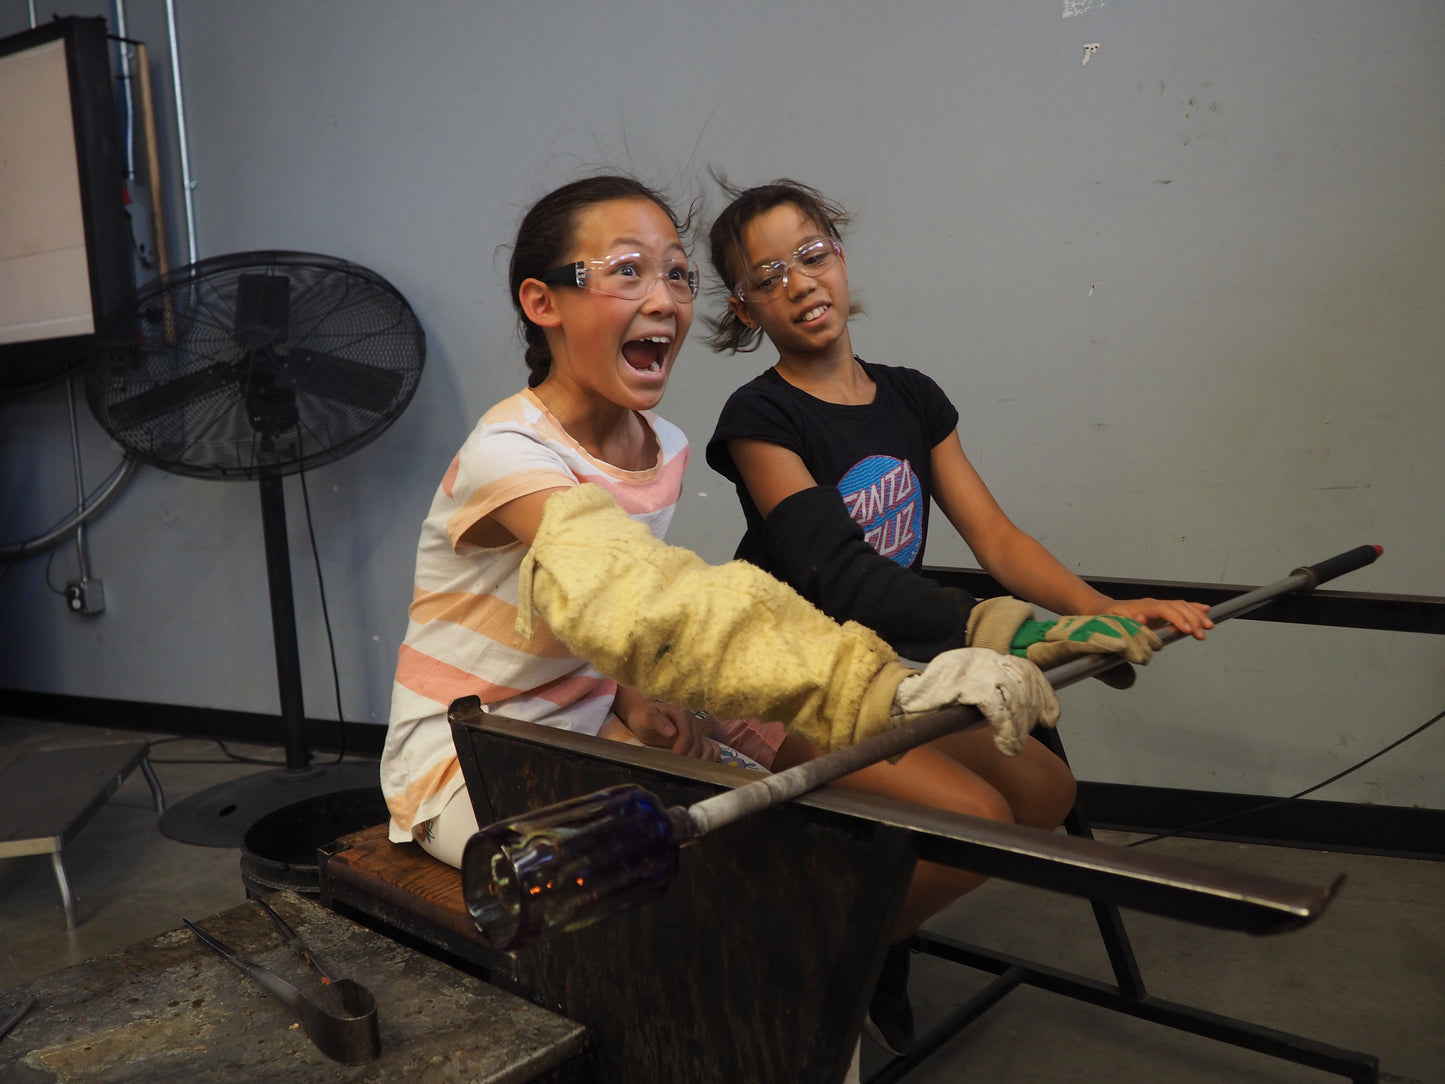 Glassblowing Camp (ages 8–12)